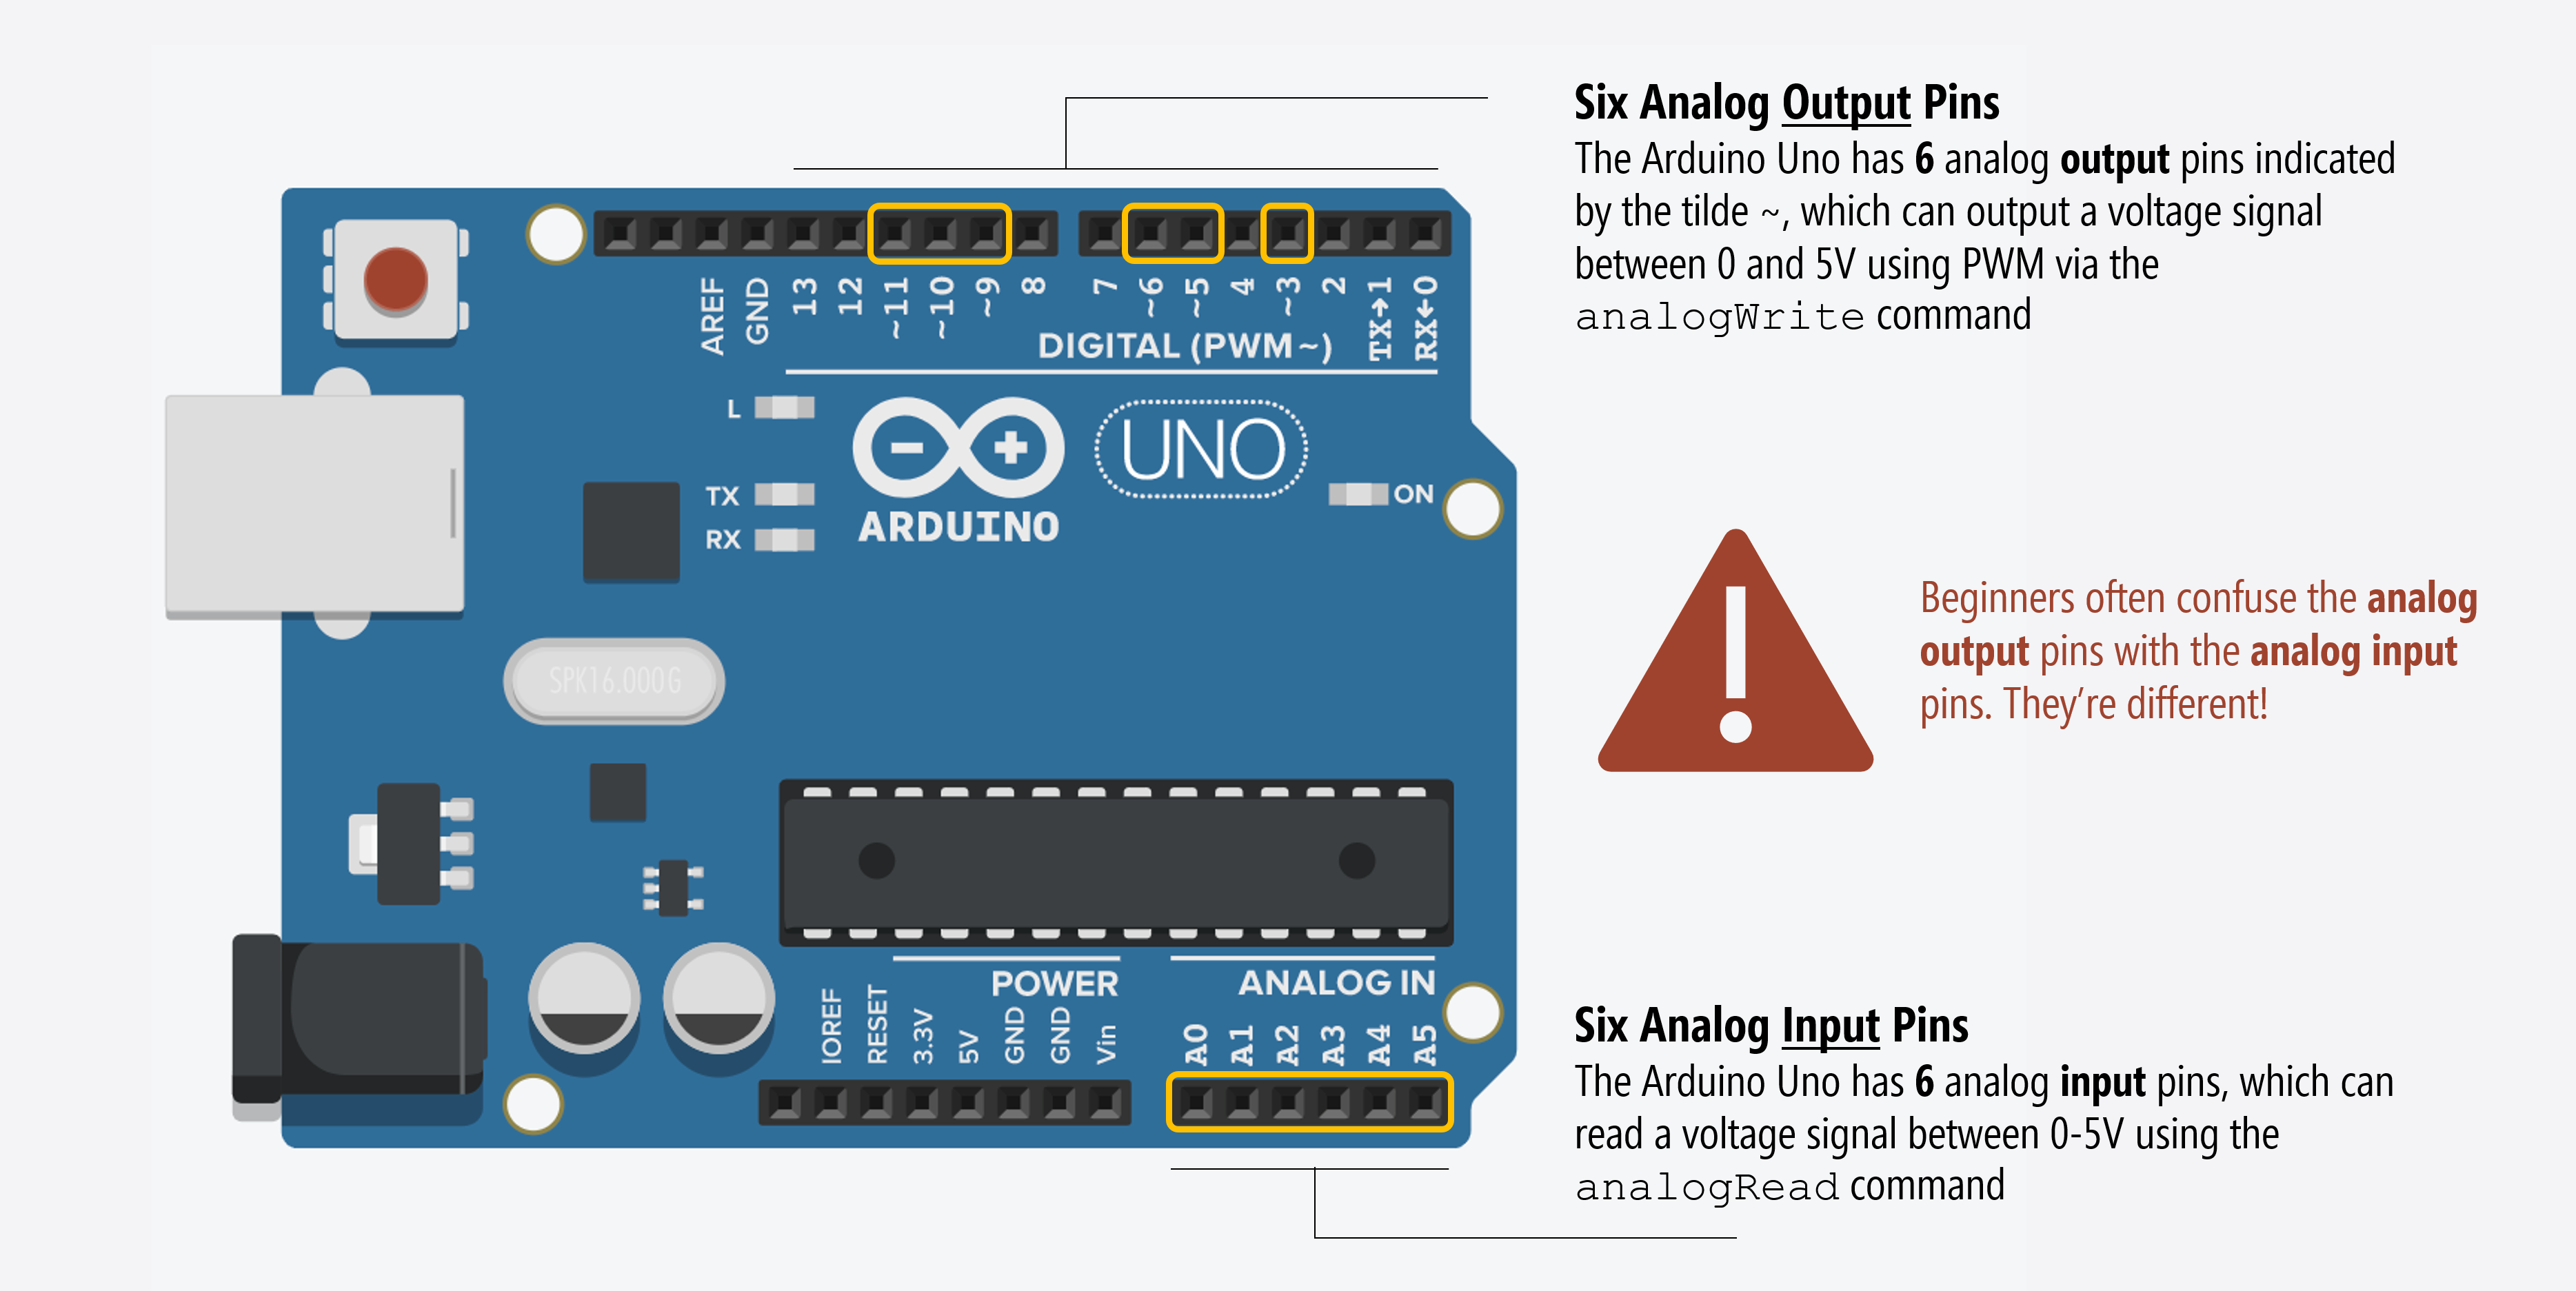 Close-up image of the Arduino Uno emphasizing that the Arduino analog input pins are different from the analog output pins